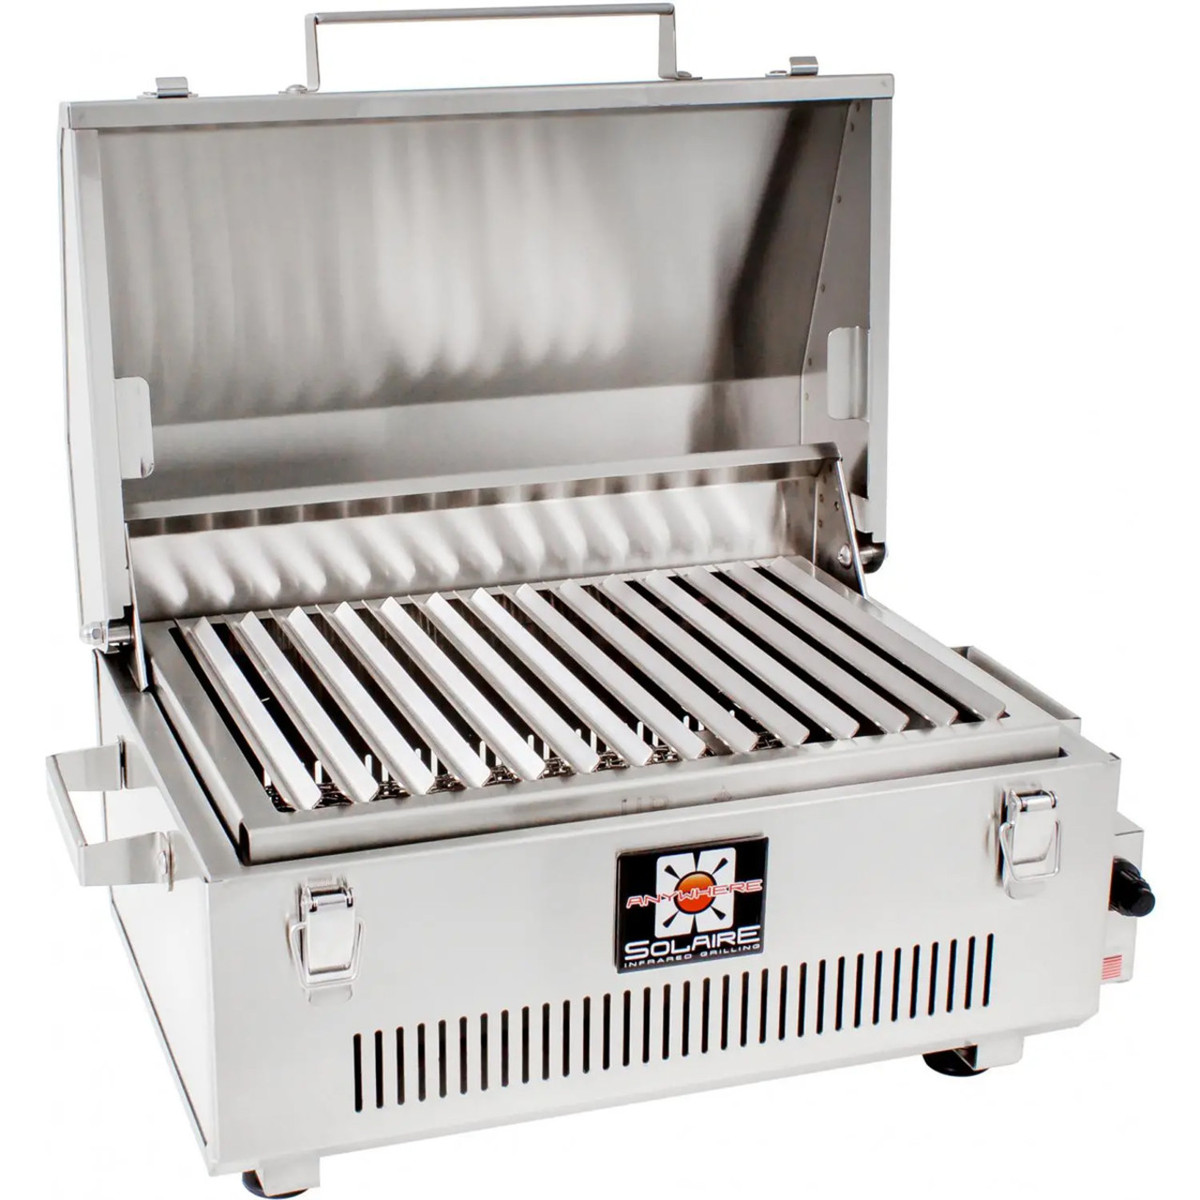 INSTA-SEAR Outdoor Portable Infrared Propane GAS Grill, Tabletop Cooking Steak Grill 15 in. Stainless Steel with Cooking Grid